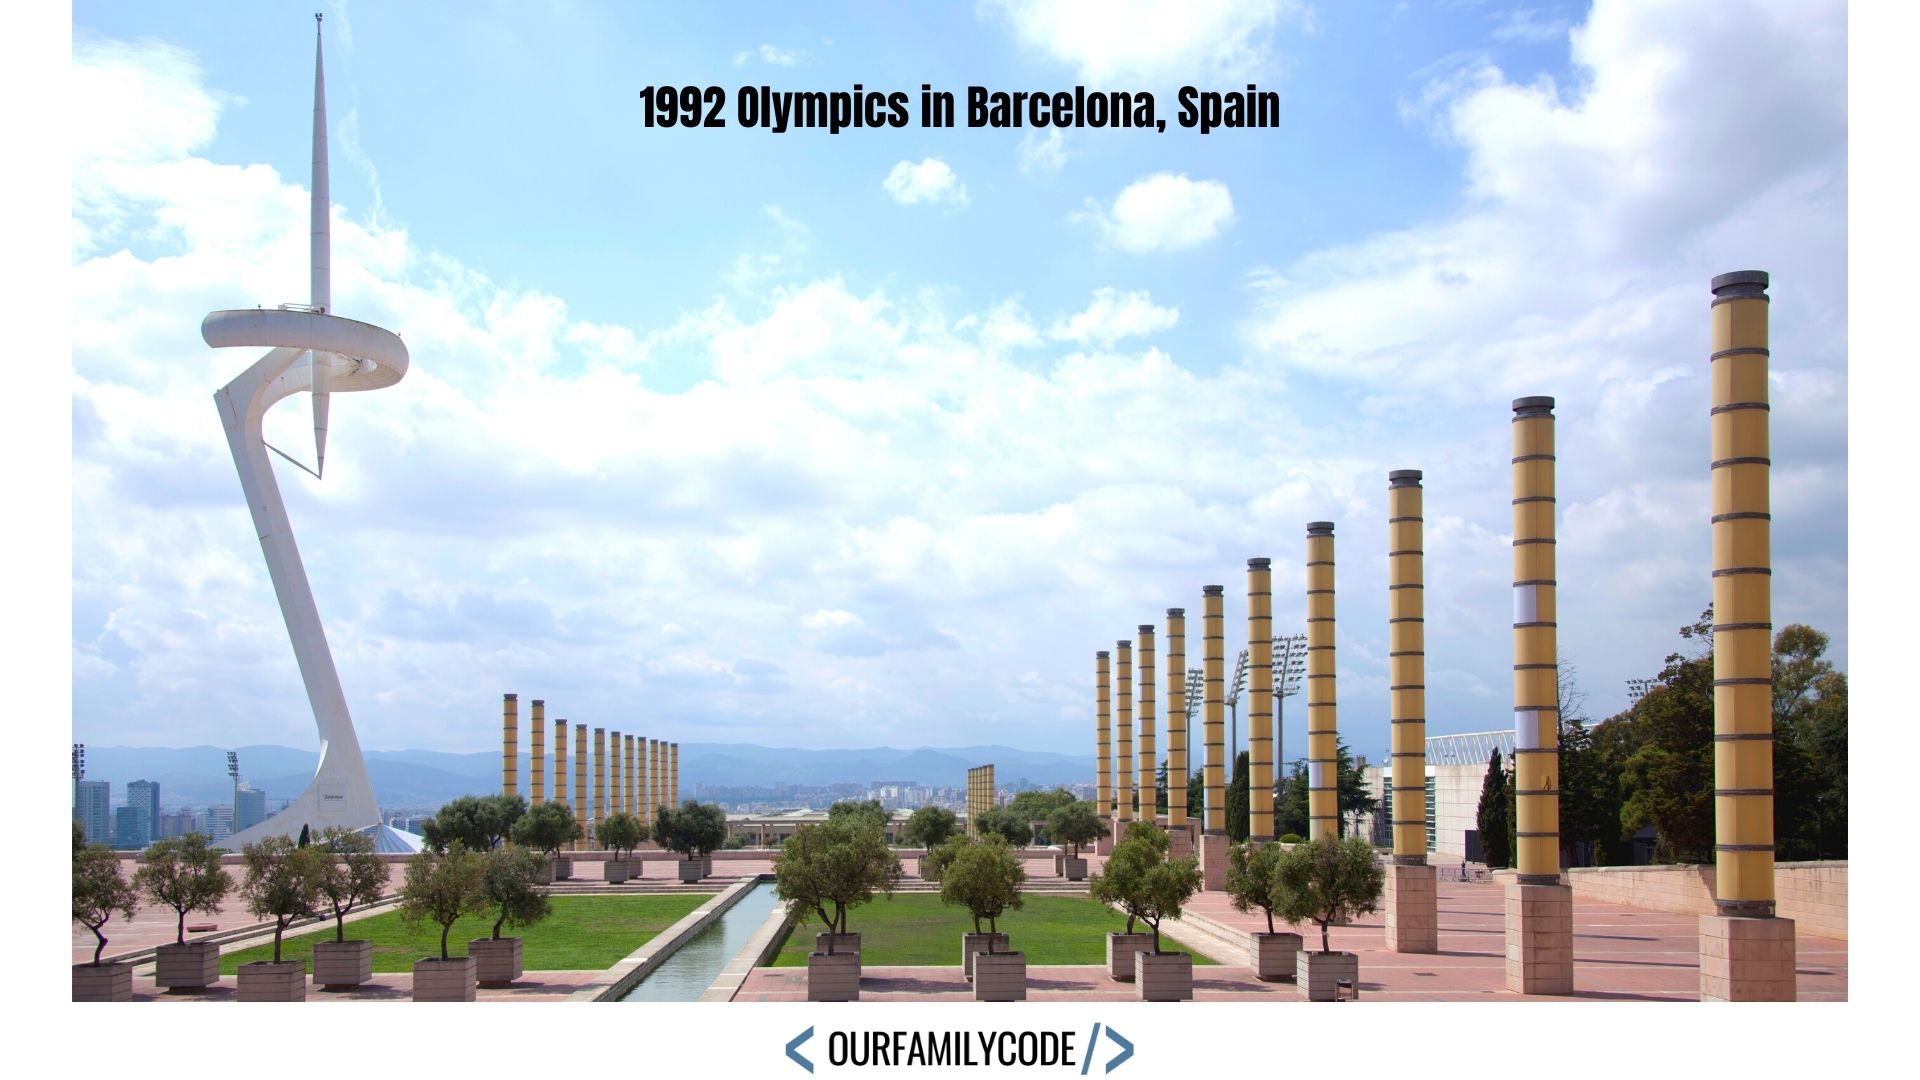 A picture of the Olympic park for the 1992 summer Olympics in Barcelona, Spain.